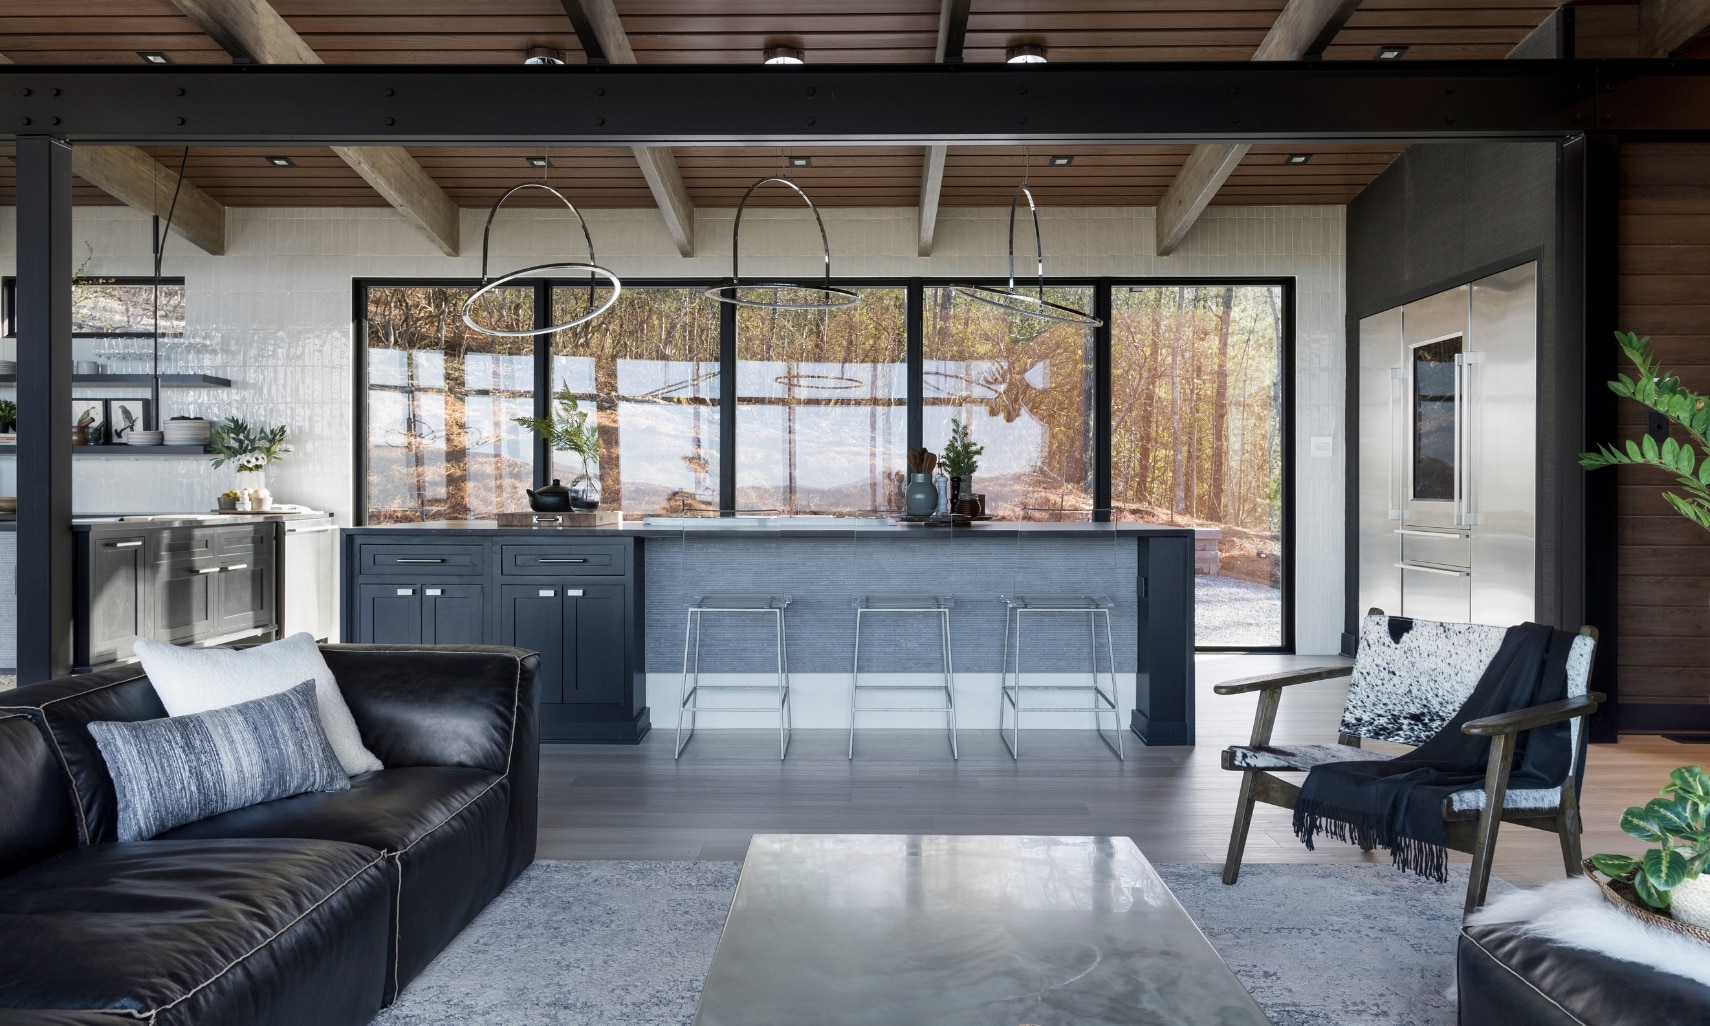 Chip Wade’s residential renovation, Pinhoti Peak, open kitchen, dining room, living room with black quartz countertops, white glossy wall tile, and floor-to-ceiling windows.